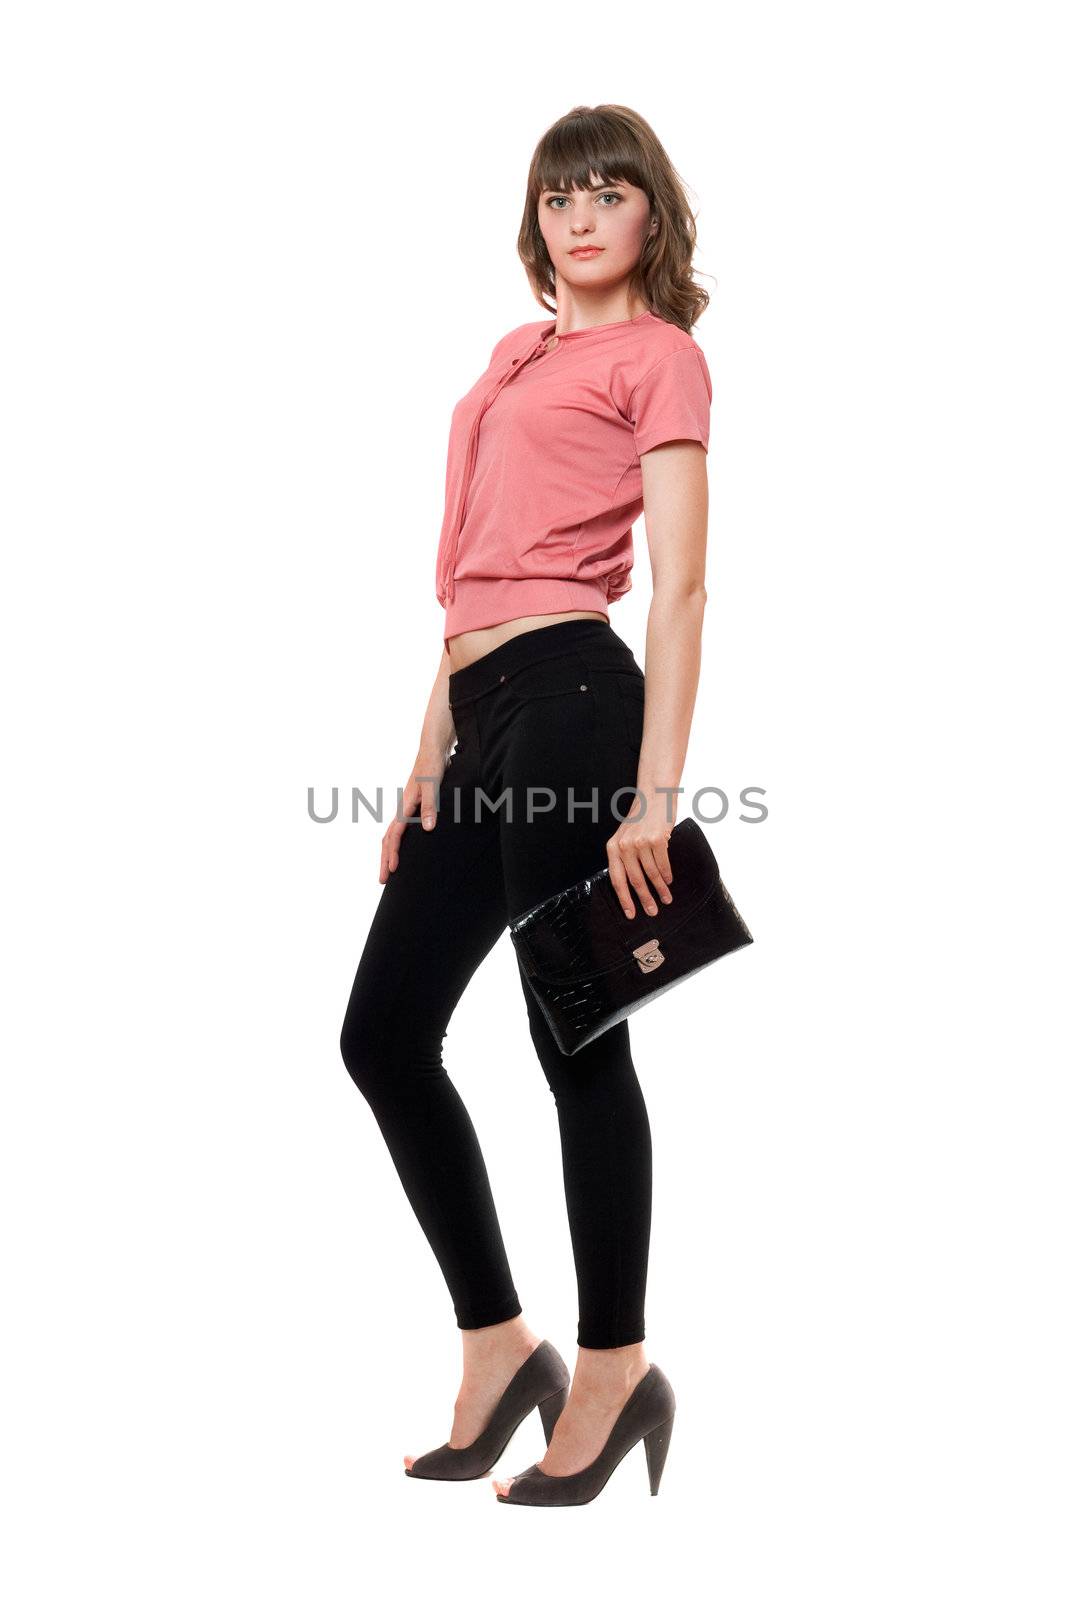 Young woman in a black leggings. Isolated on white